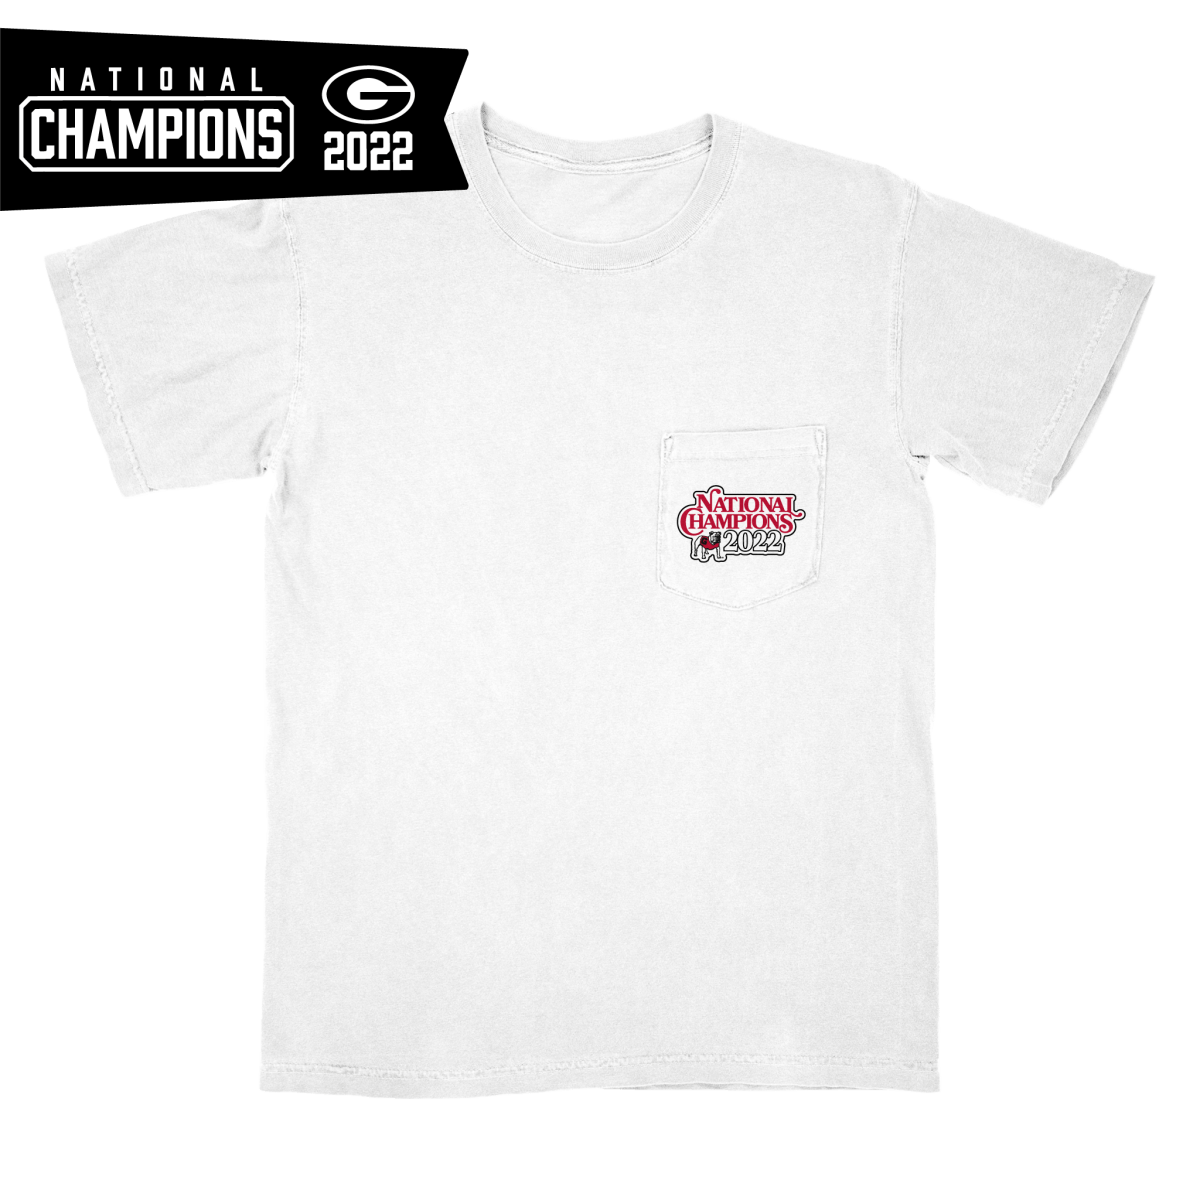 Georgia Bulldogs Back-To-Back T-shirt, National Championship T-shirt - Ink  In Action